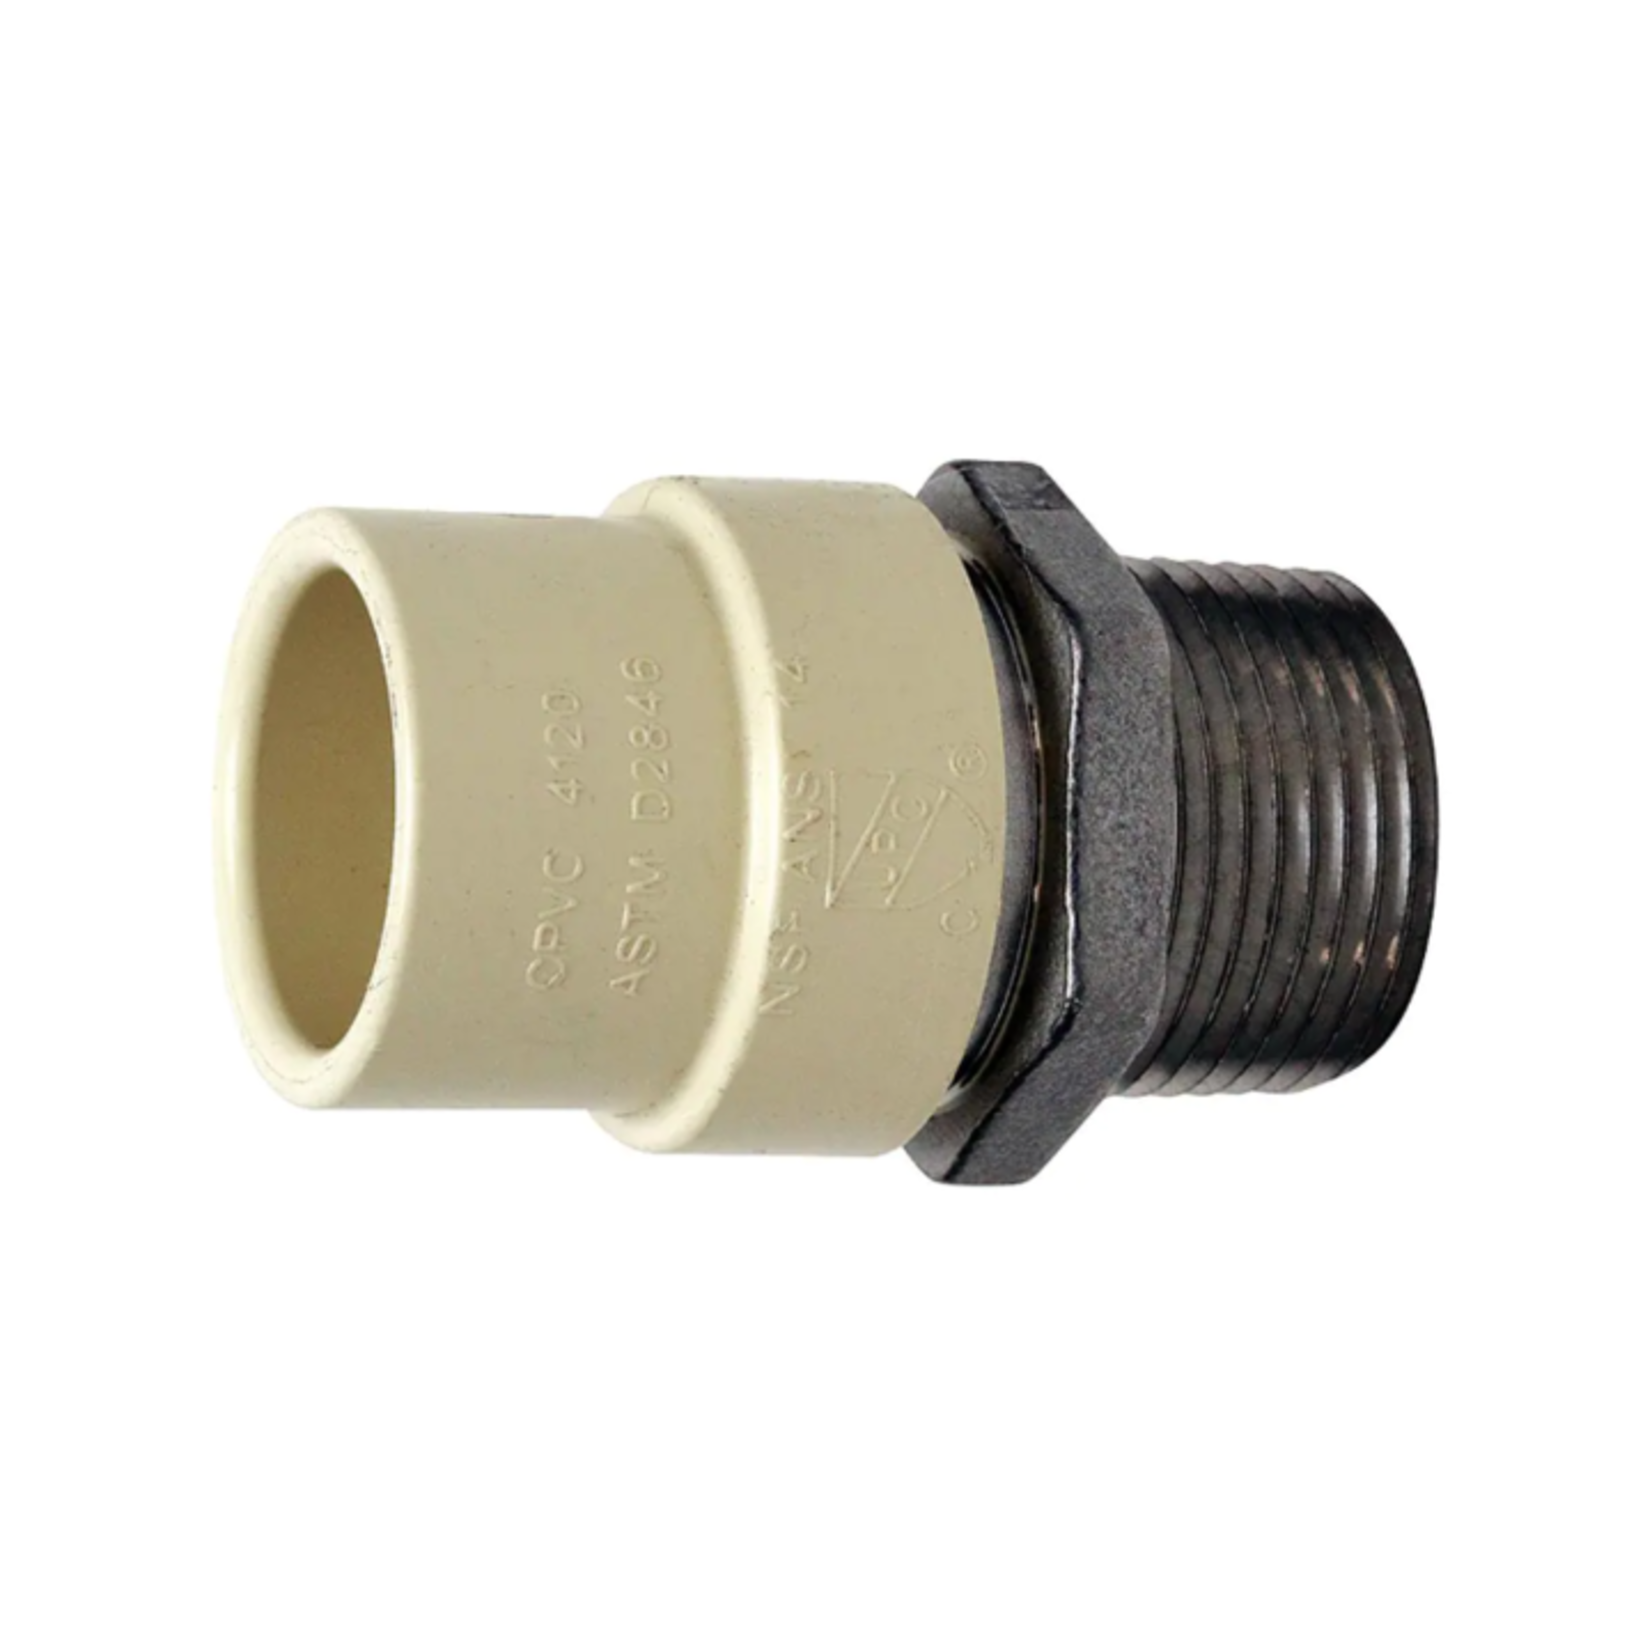 EVERFLOW 1/2 IN CPVC SCHEDULE 40 X STAINLESS STEEL MALE ADAPTER